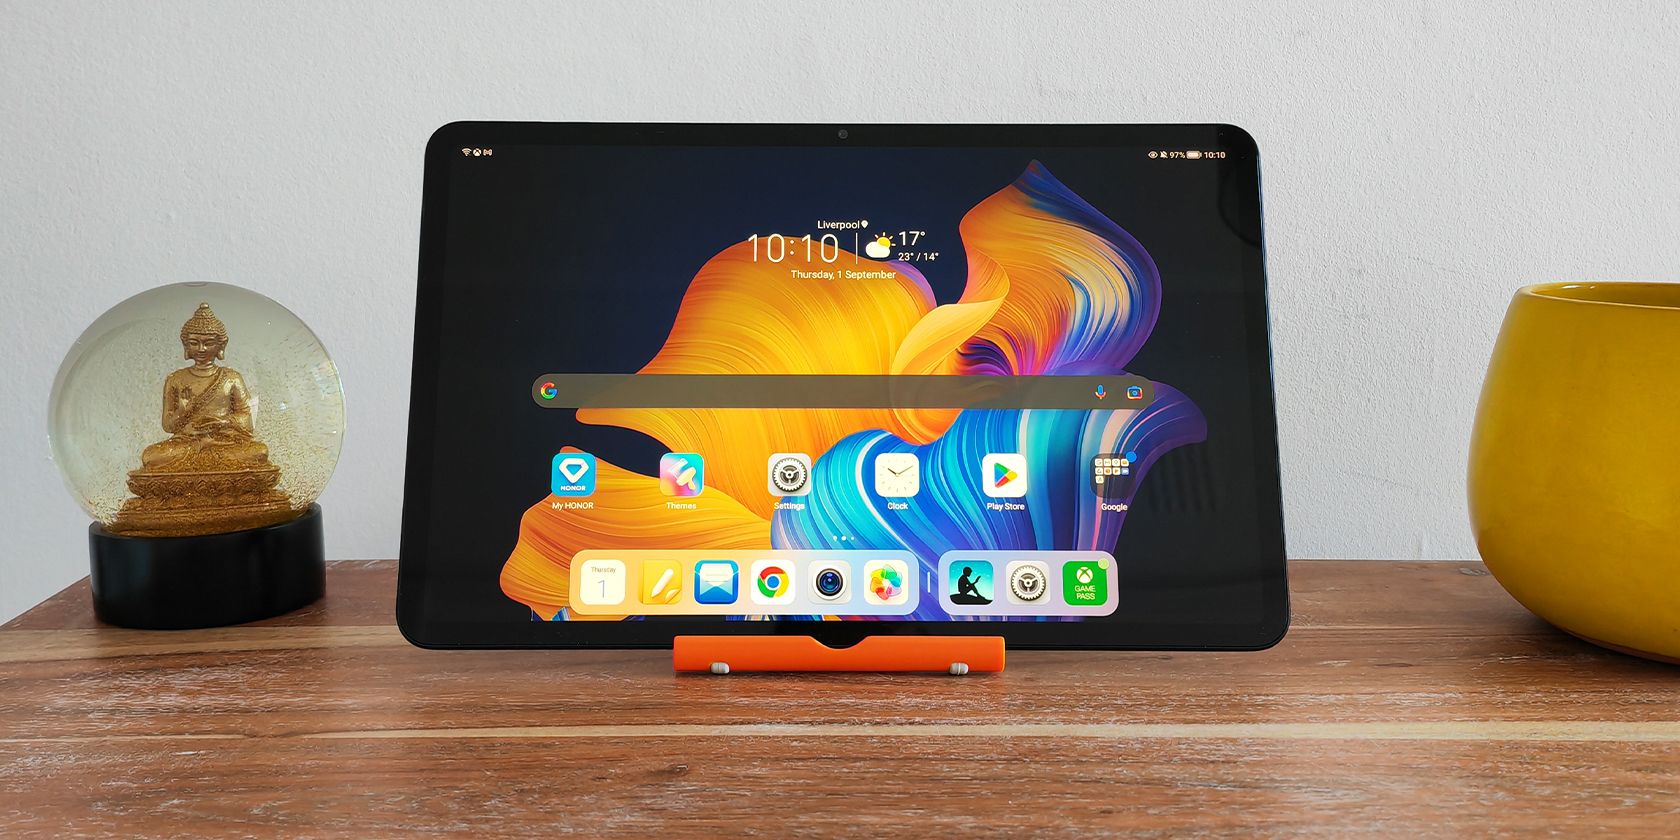 Honor Pad 8 review: An affordable and capable 12-inch Android tablet